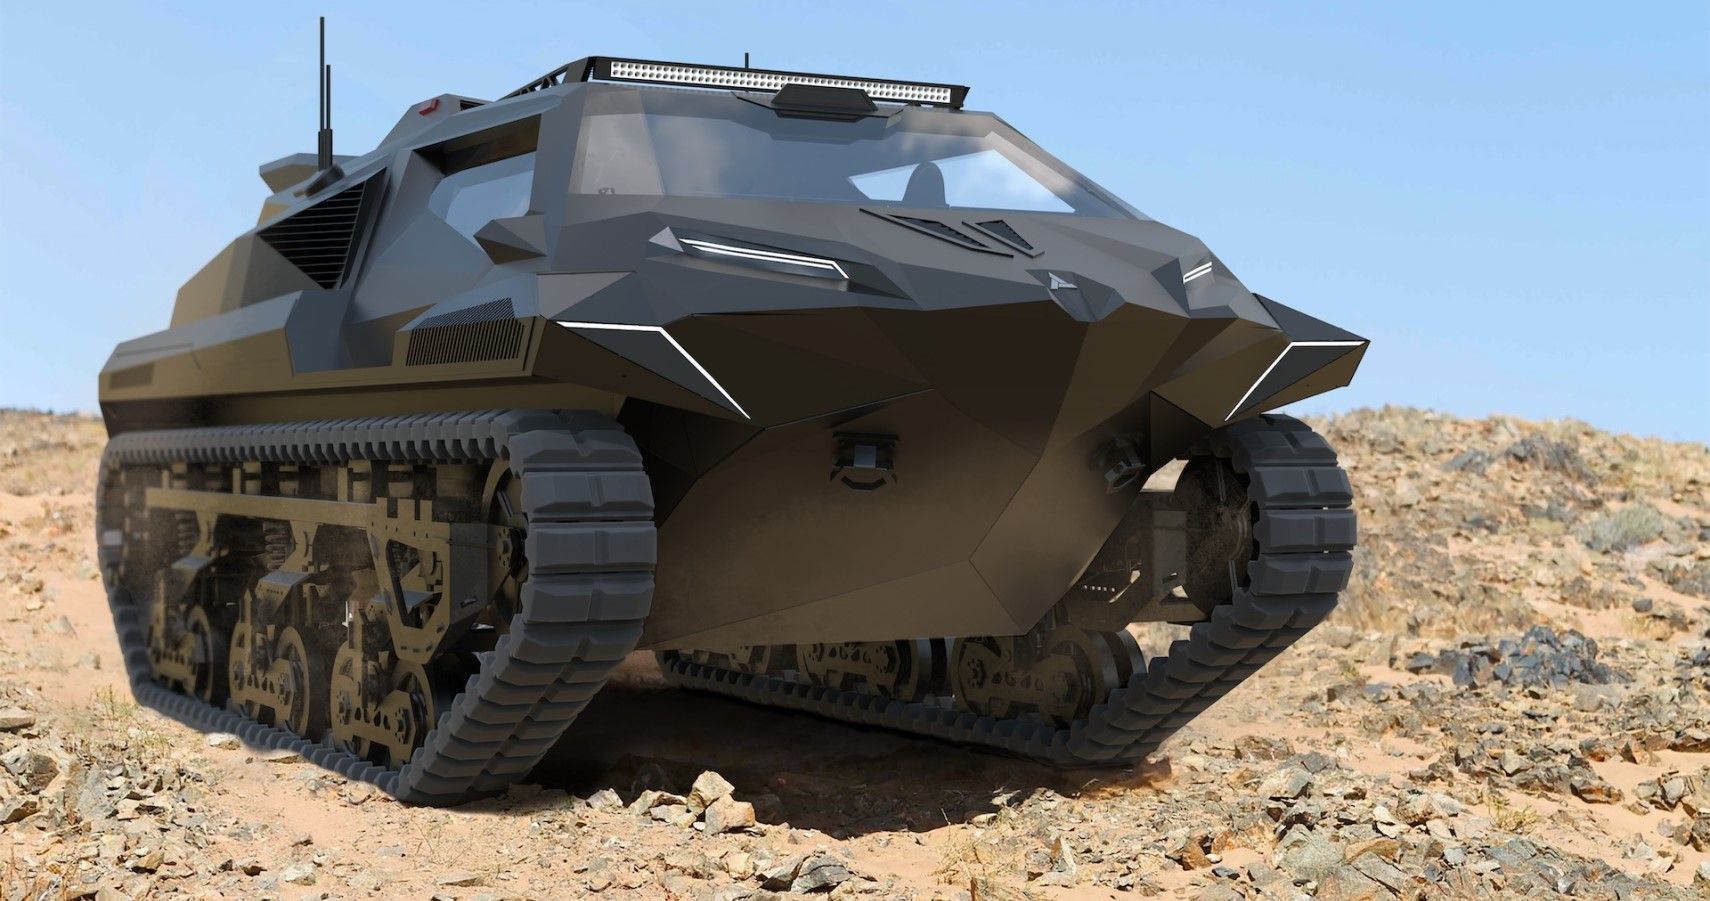  STORM is an ARMORED HYBRID AMPHIBIOUS MPV in the desert front third quarter view